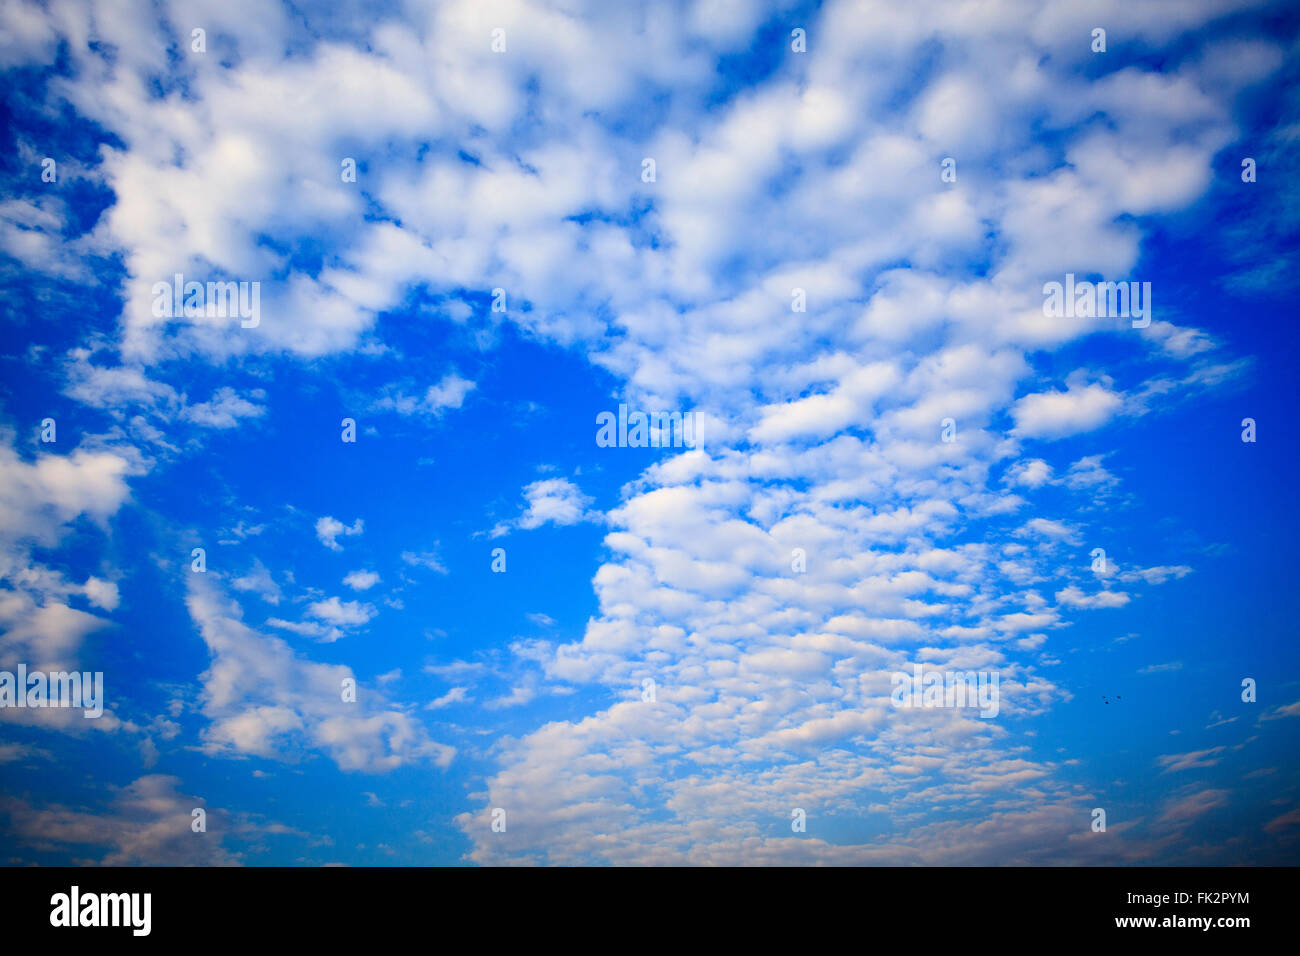 The clouds in the blue sky, taipei, Taiwan Stock Photo